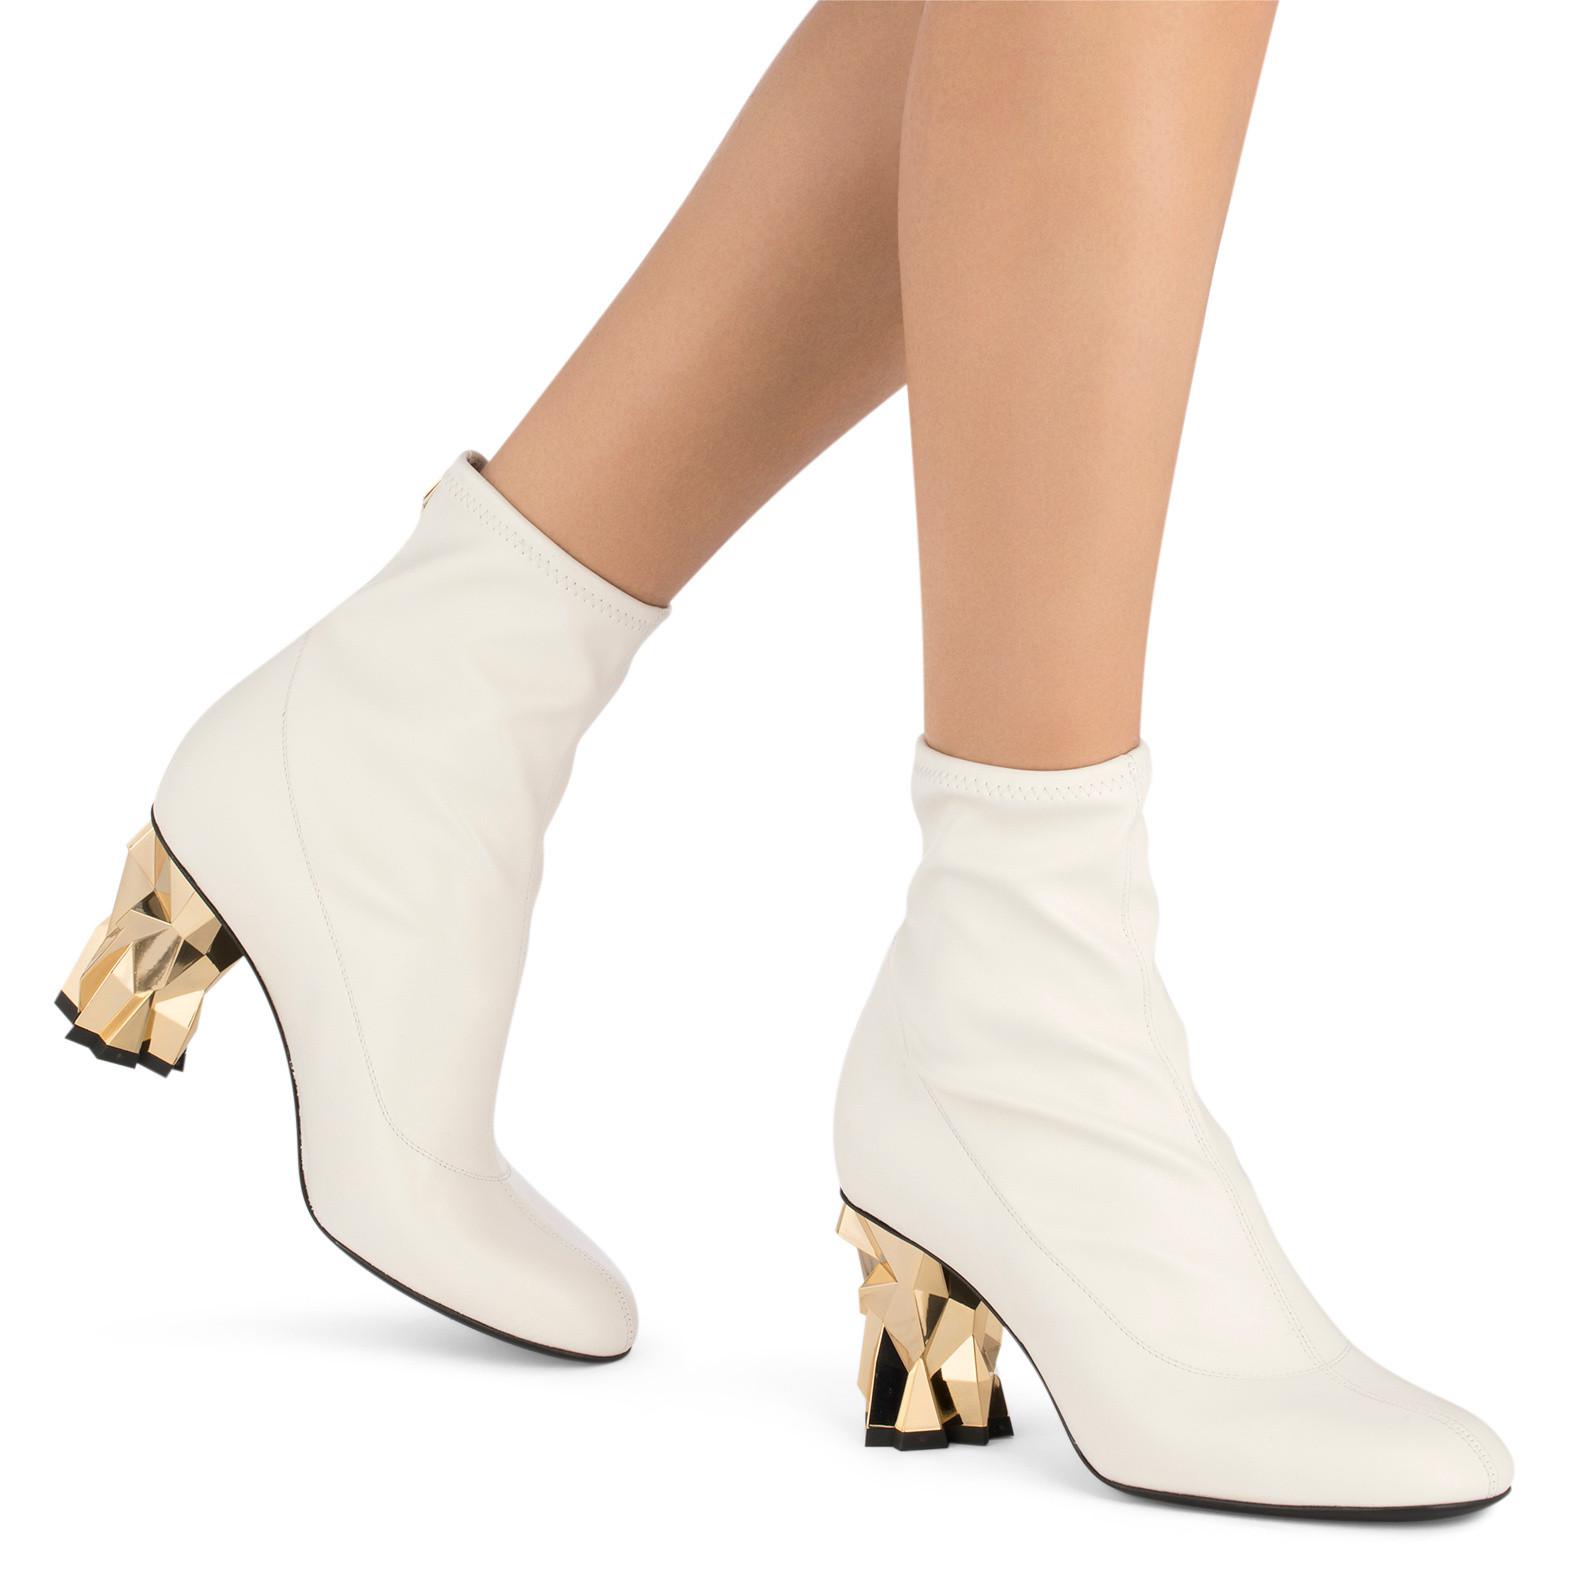 Giuseppe Zanotti Leather Gold Heel Ankle Boots in White - Lyst